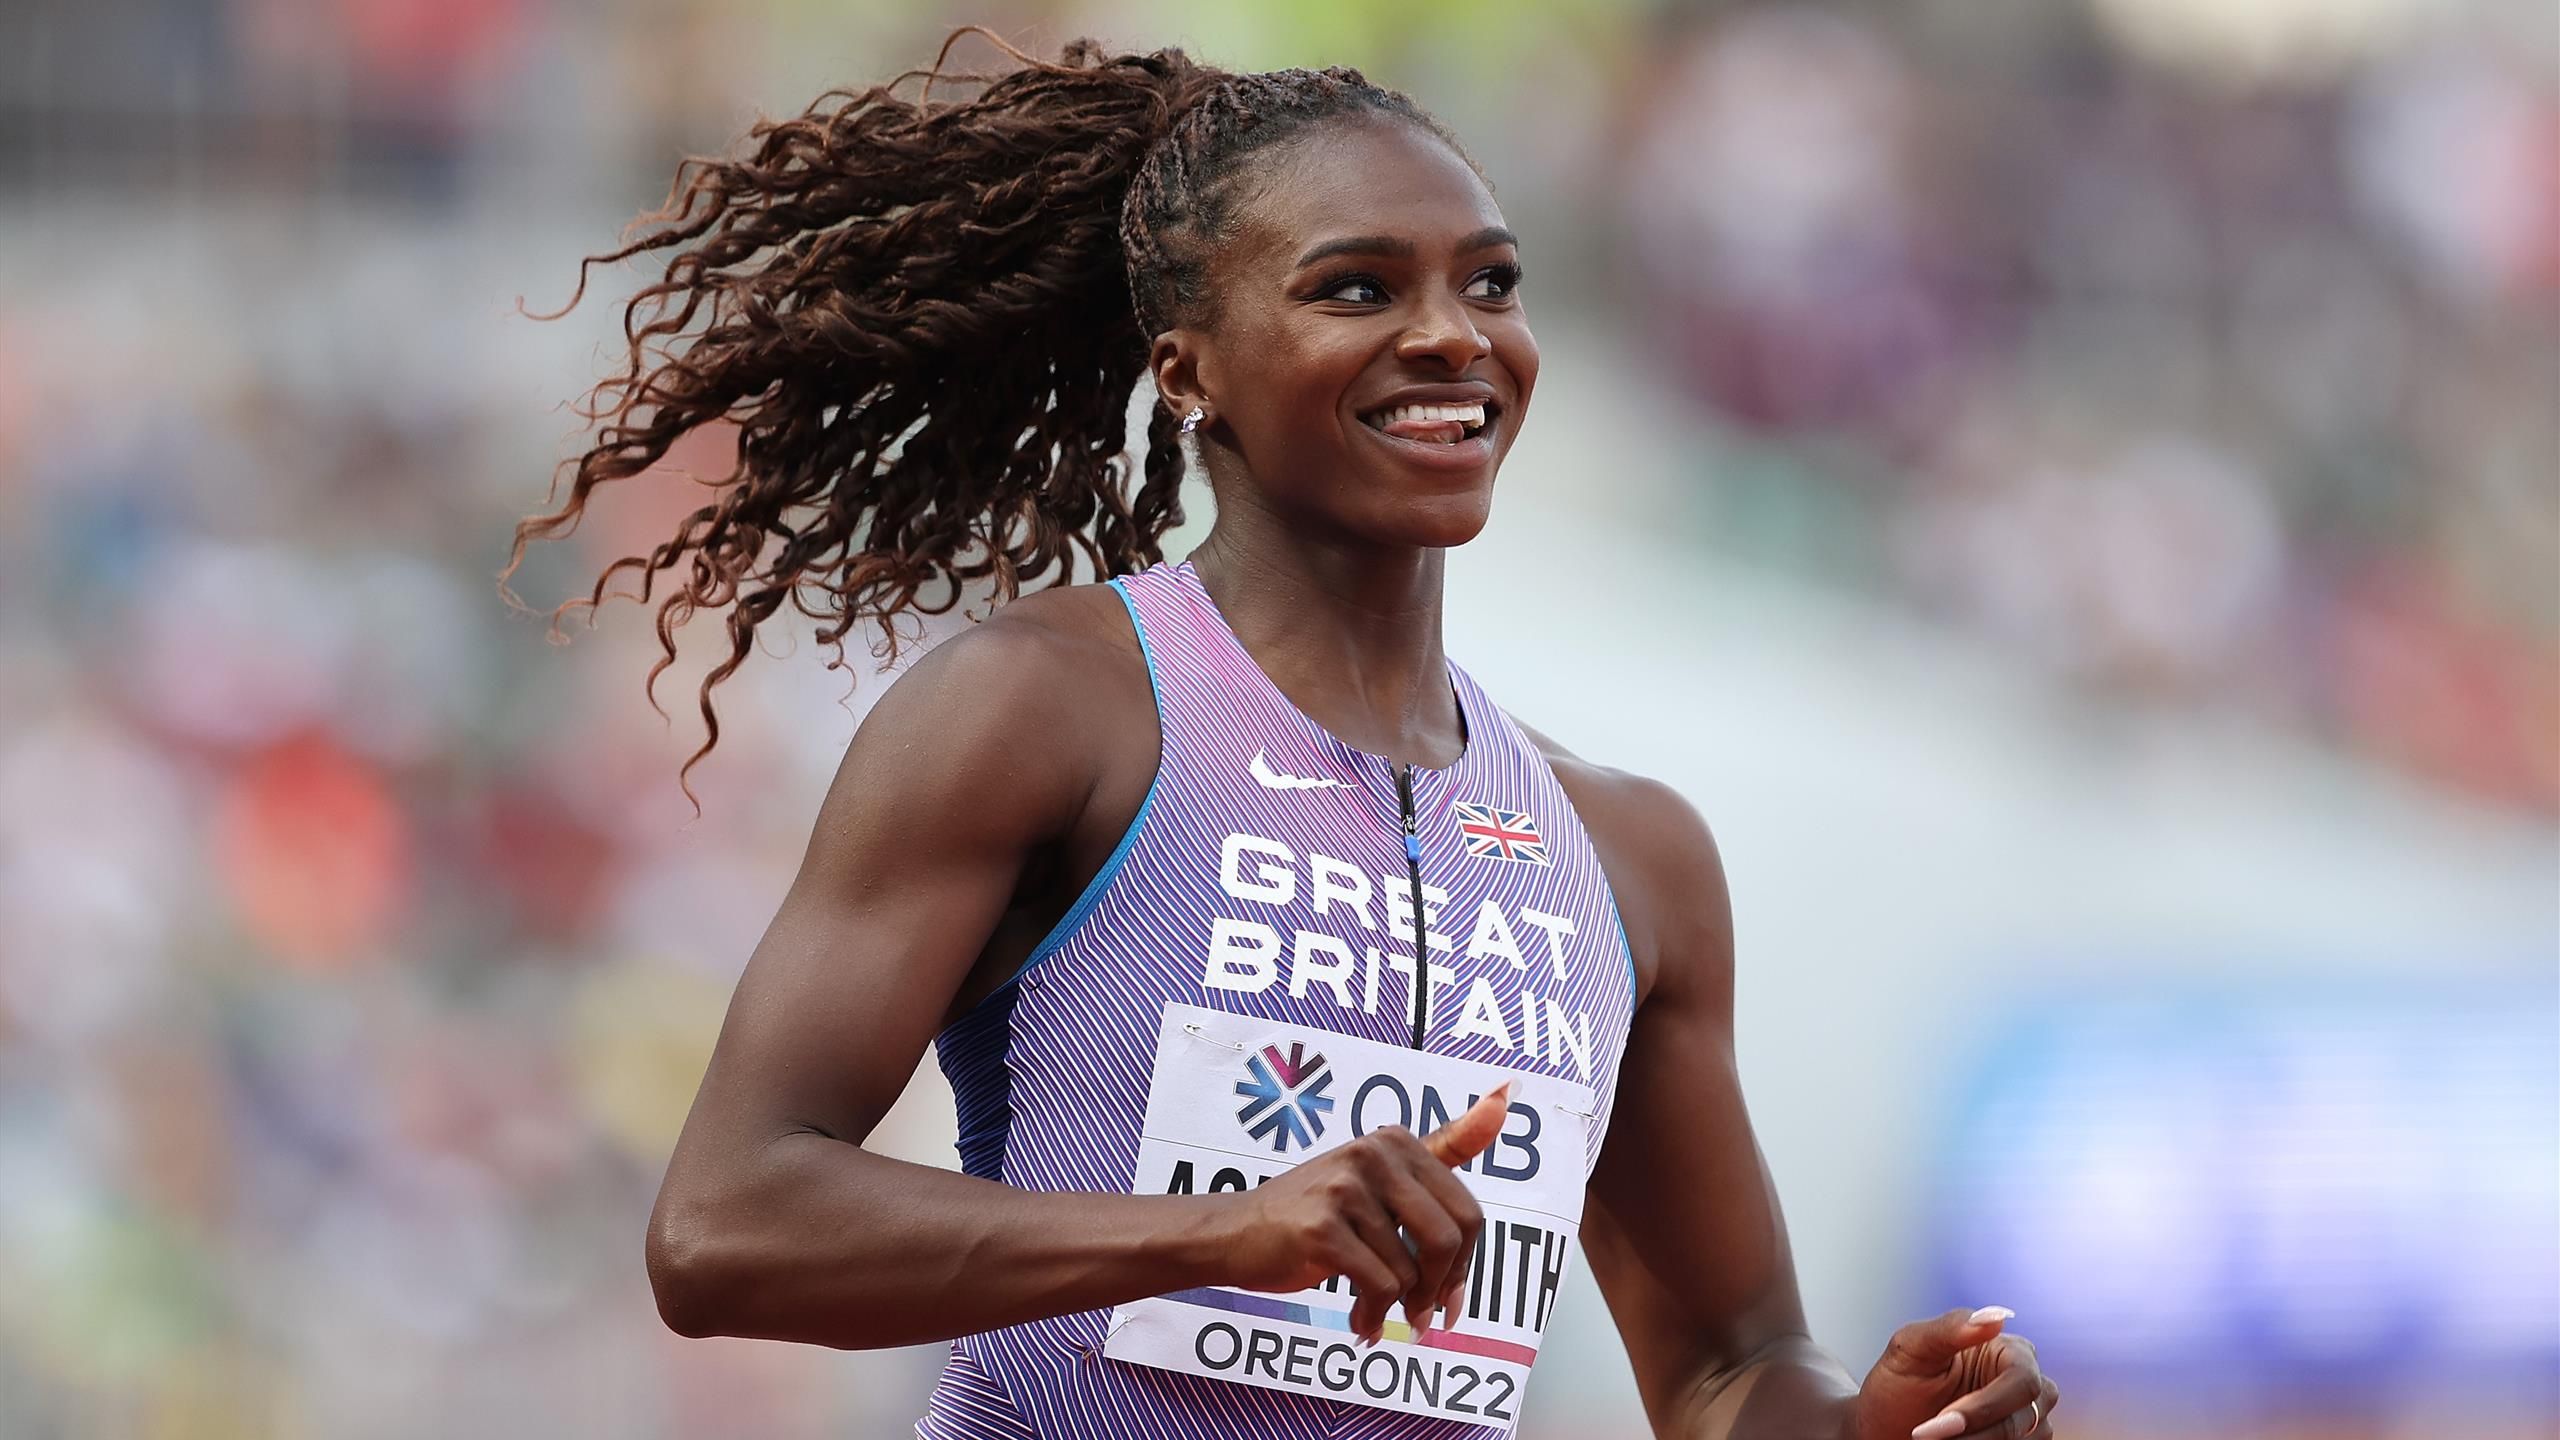 Dina Asher-Smith runs 10.84 to qualify for 100m semis at World Championships,  Laura Muir also through in 1500m - Eurosport